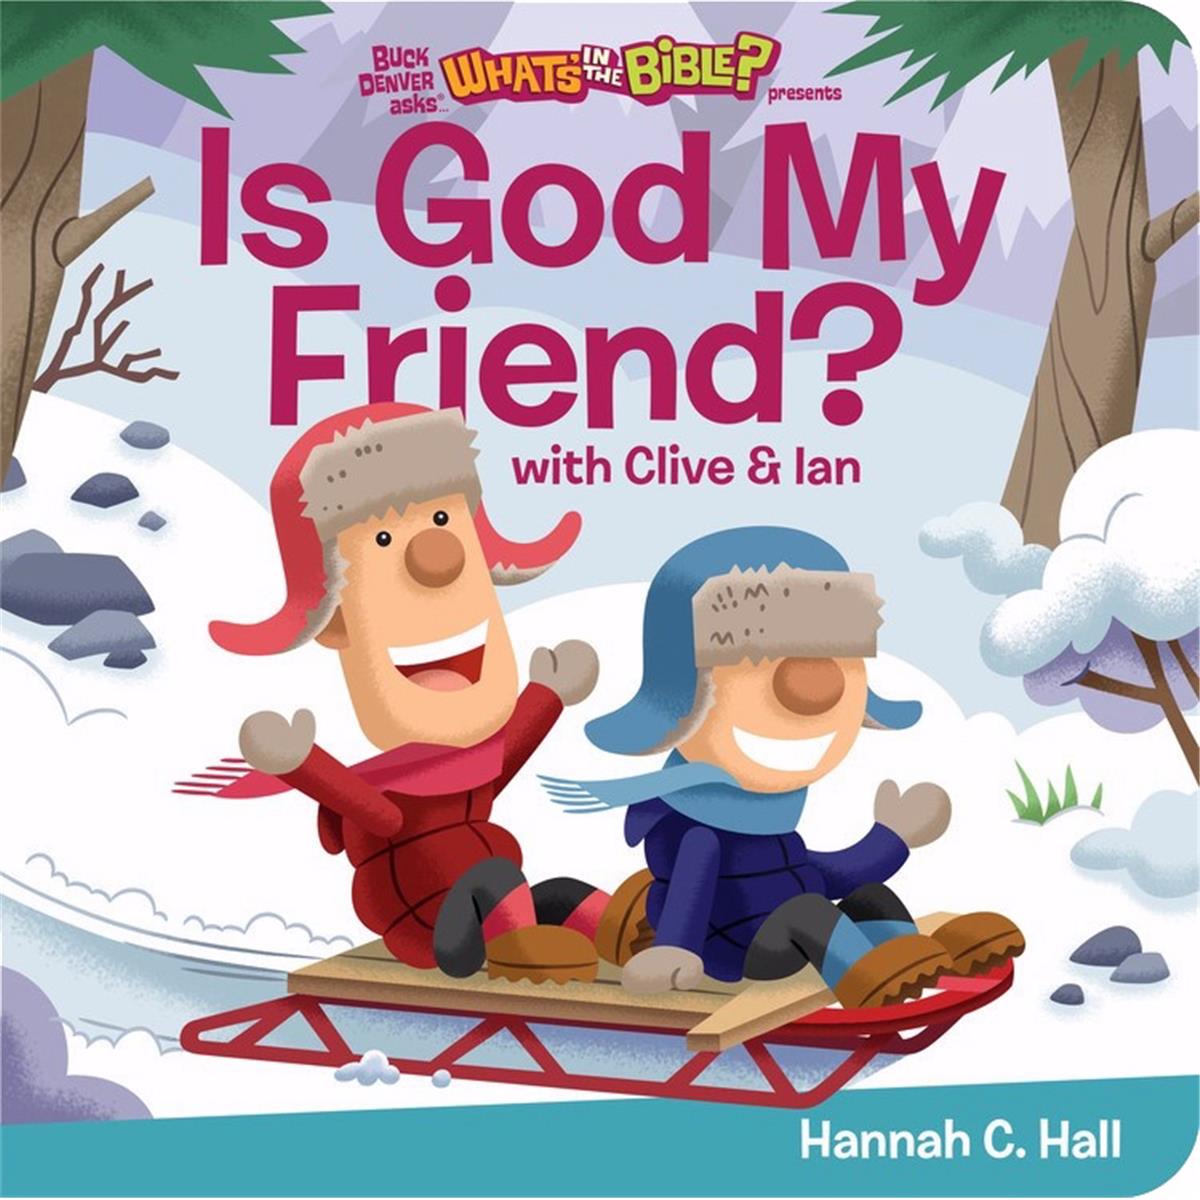 Jellytelly Press 147870 Is God My Friend - Buck Denver Asks Whats In The Bible